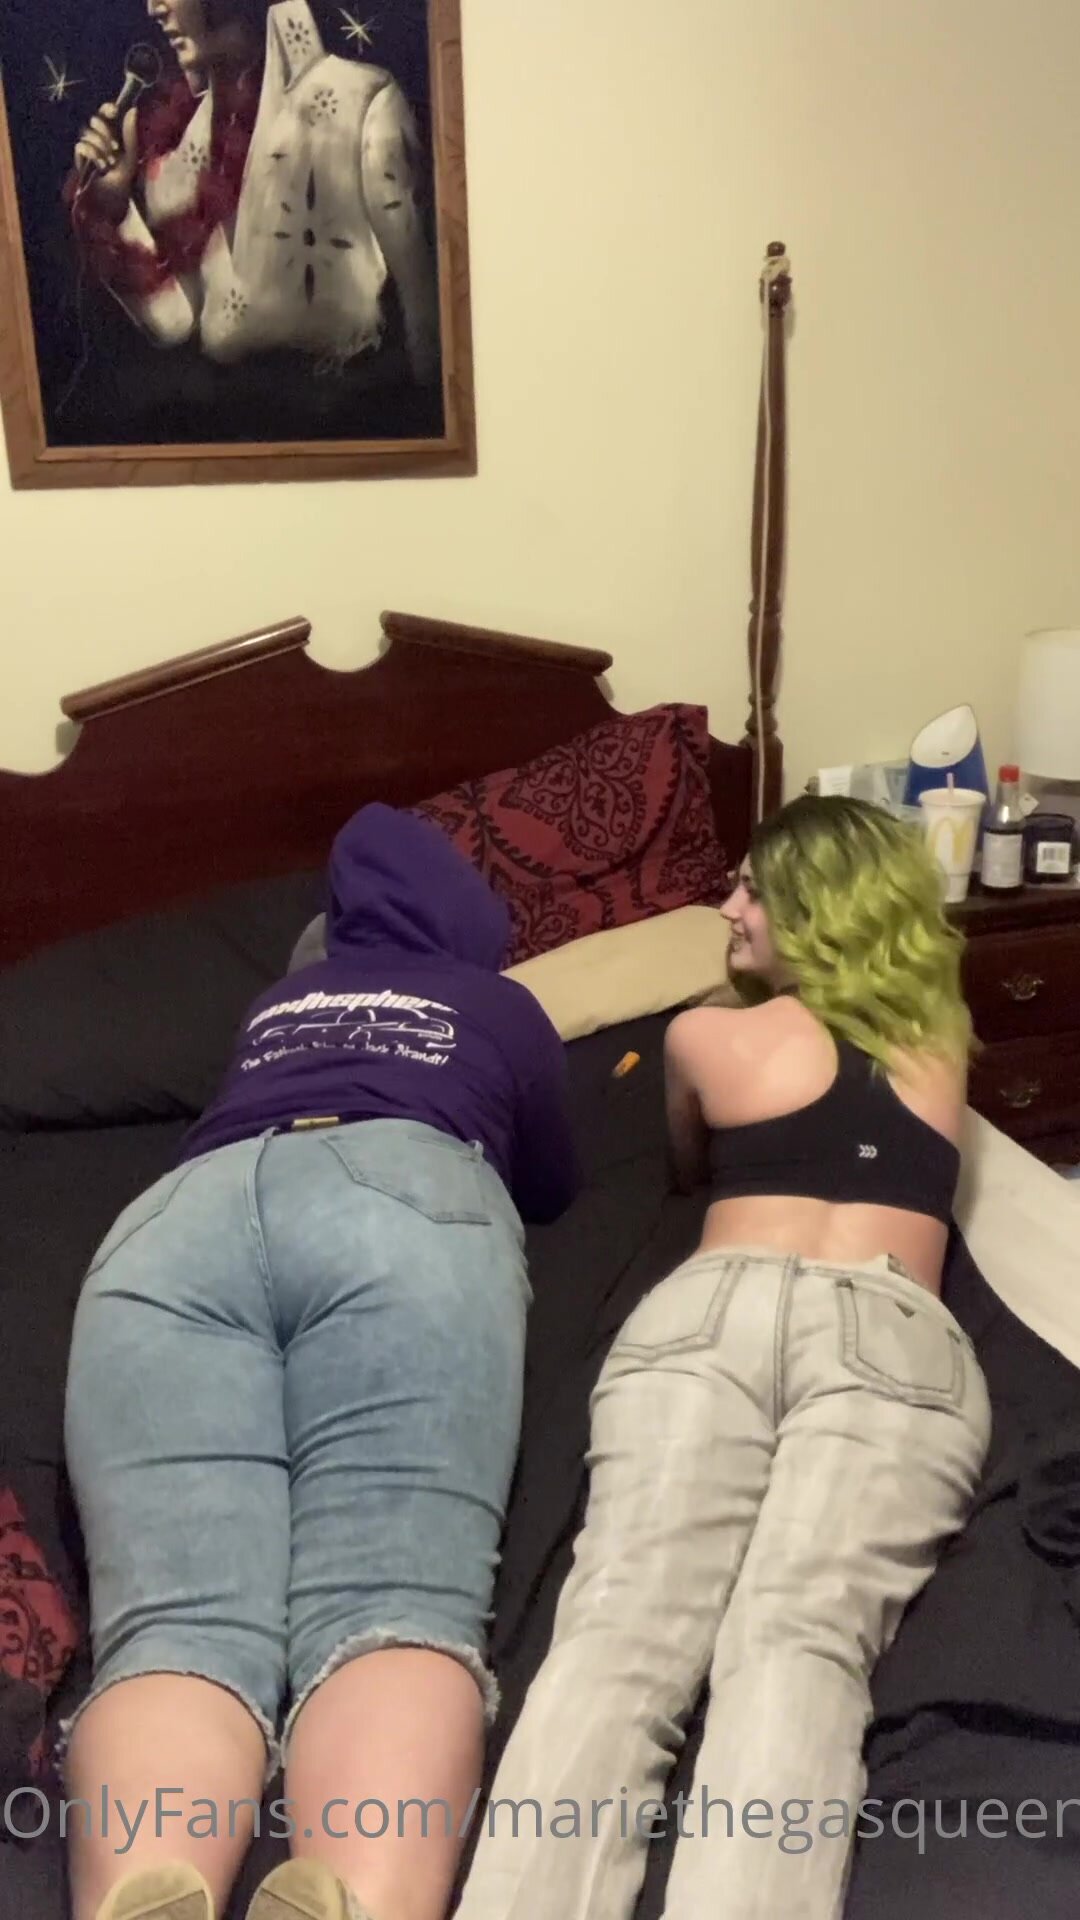 Two friends have a farting contest